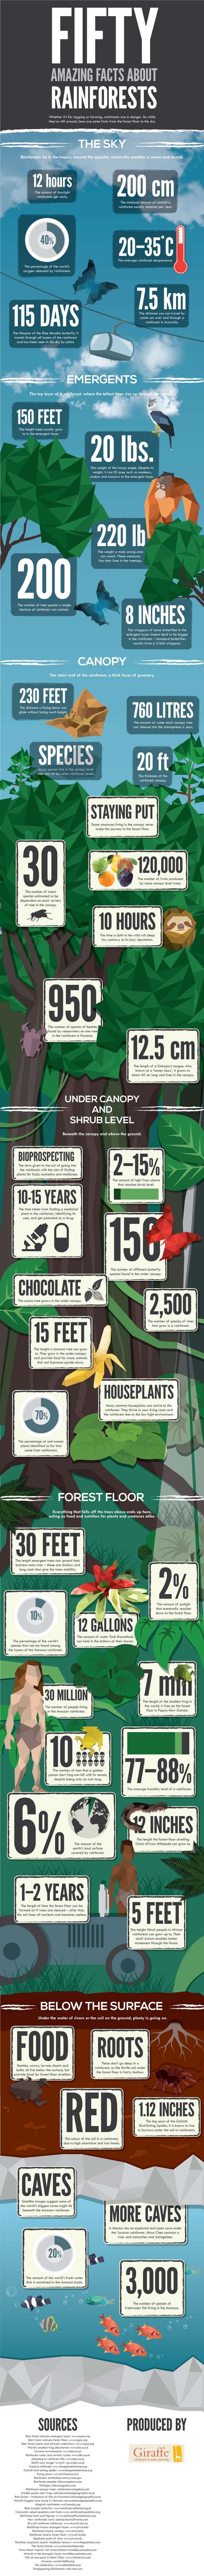 50 Amazing Facts About Rainforests